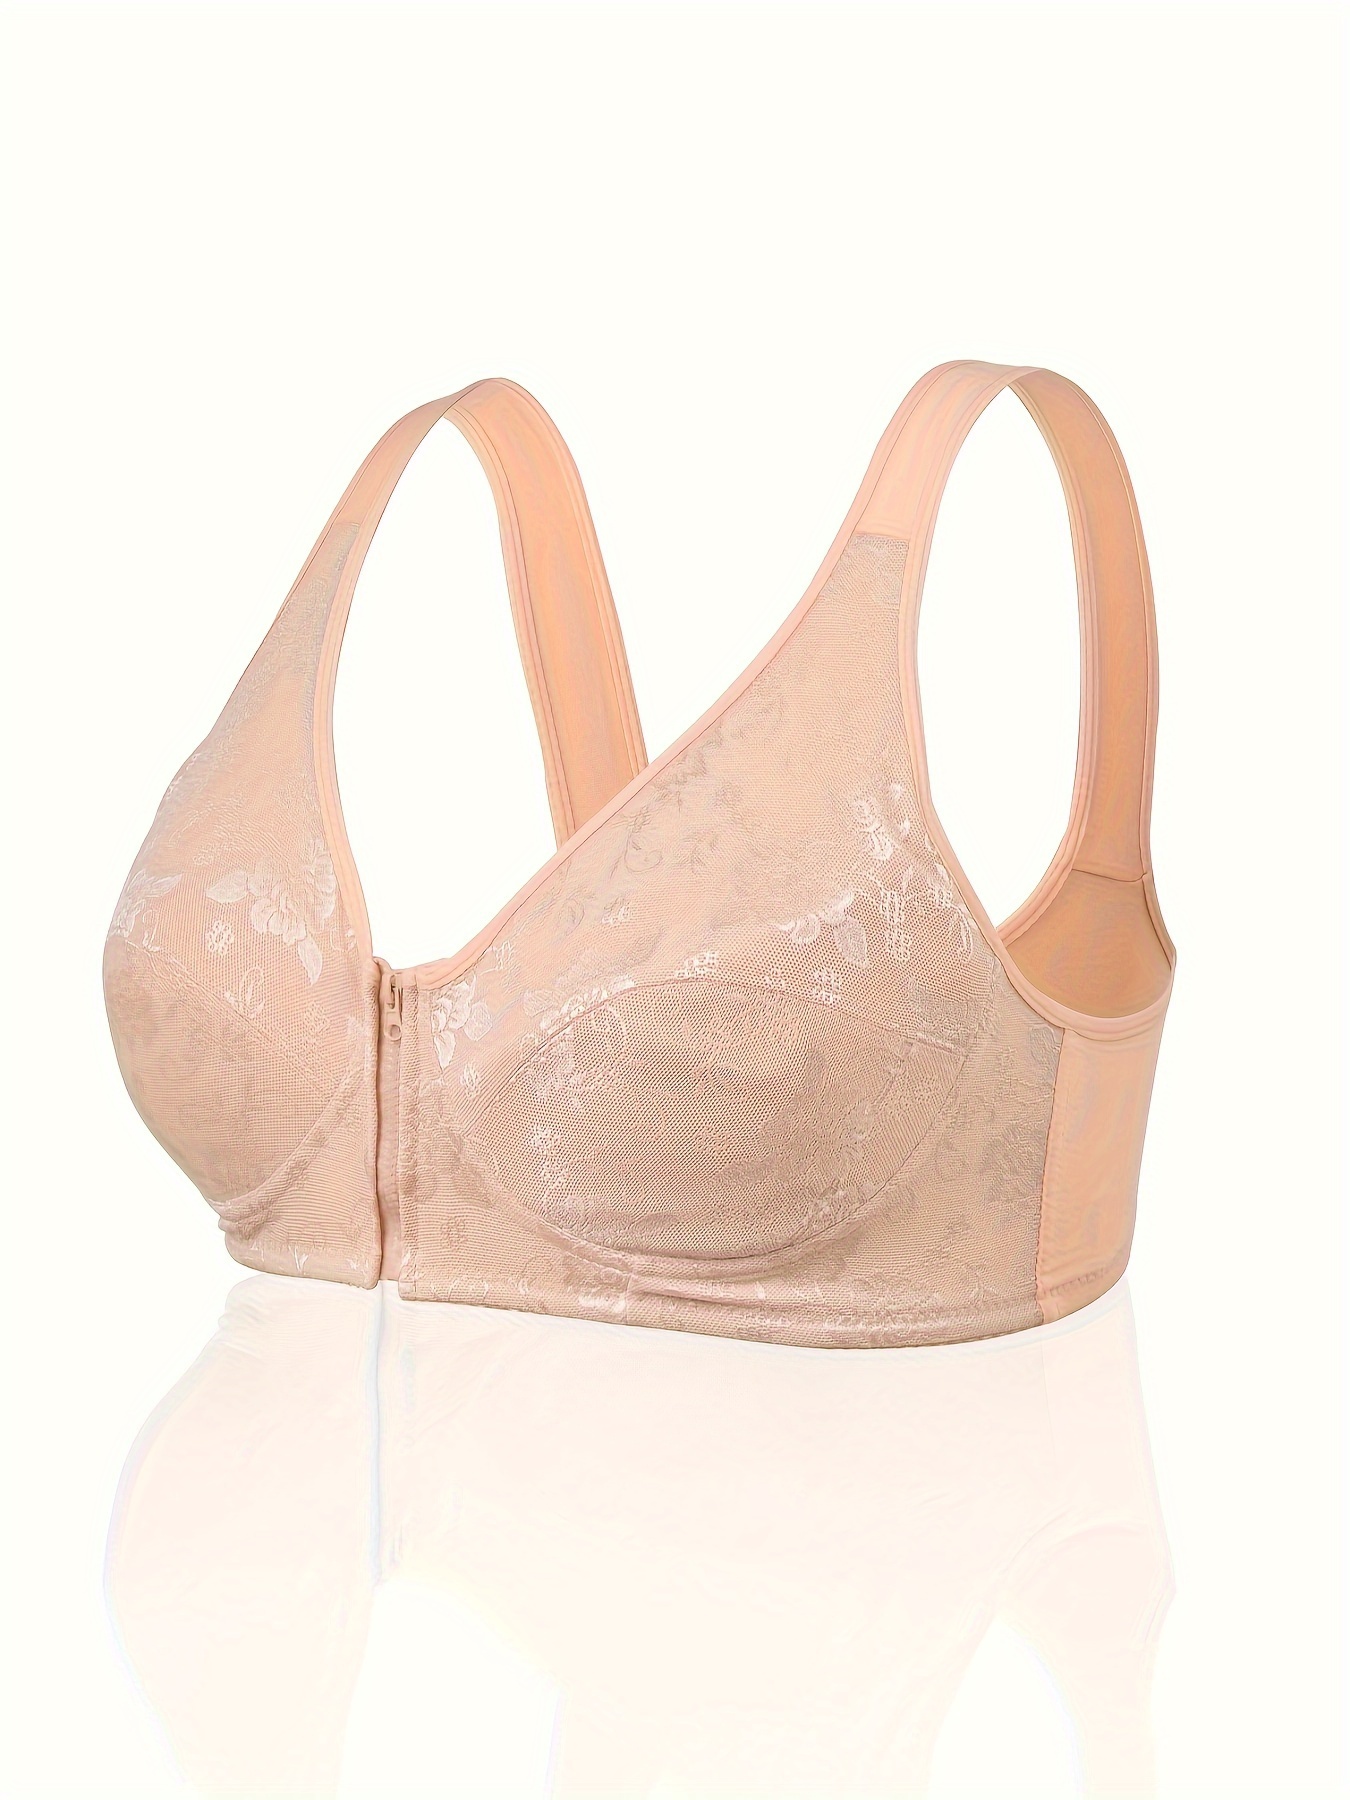 Lace Bralettes for Women Front Closure Full Coverage India